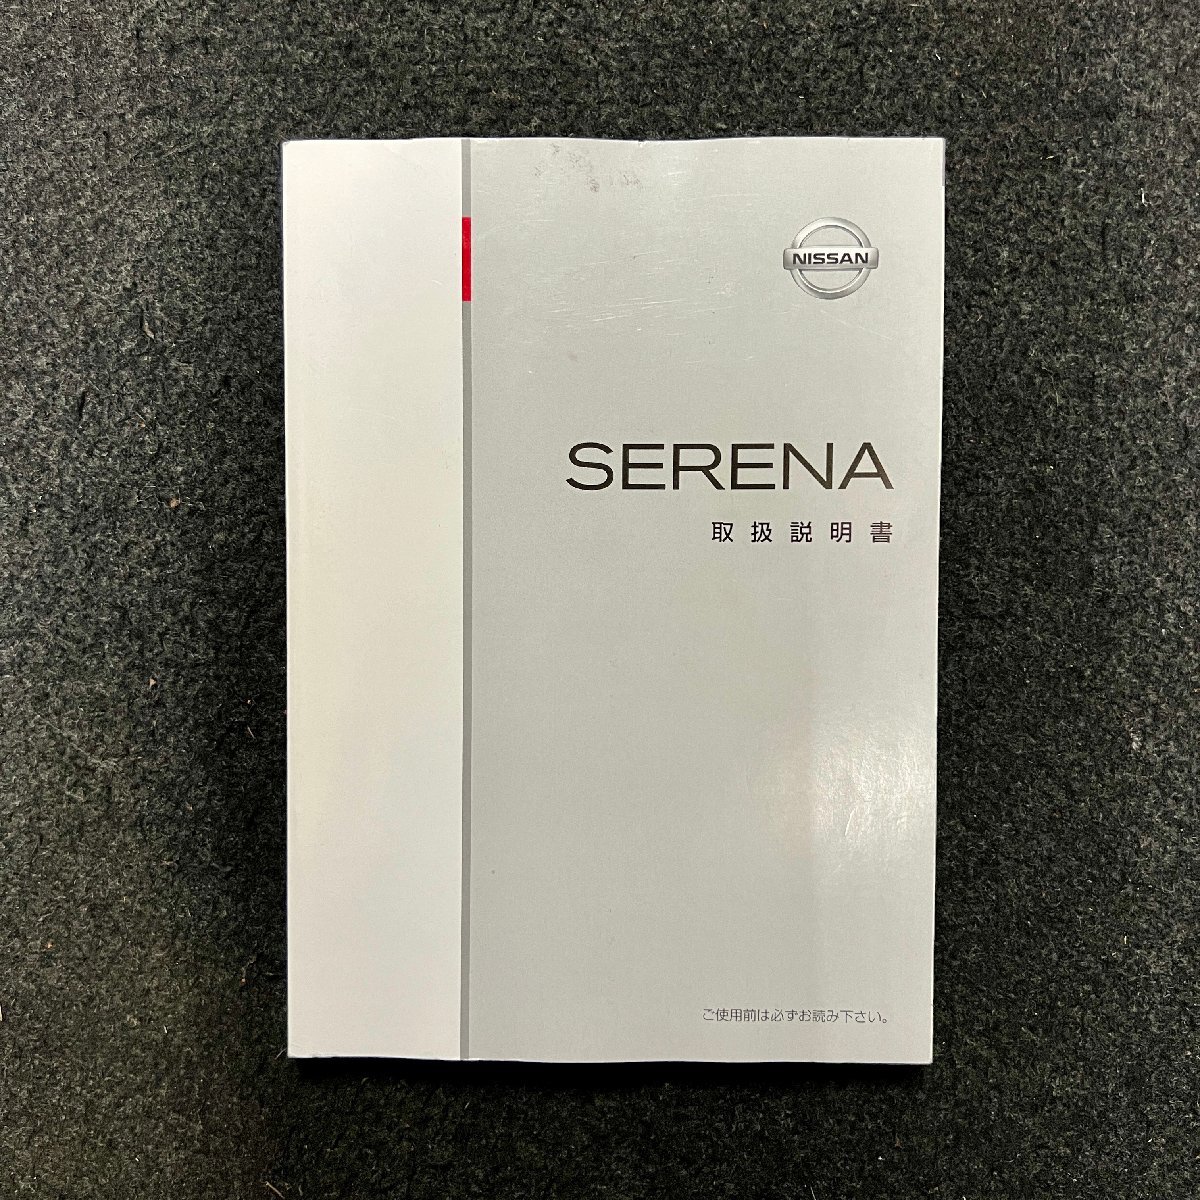  owner manual Serena C26 T00UM-1VA0A 2010 year 11 month 2010 year 11 month 